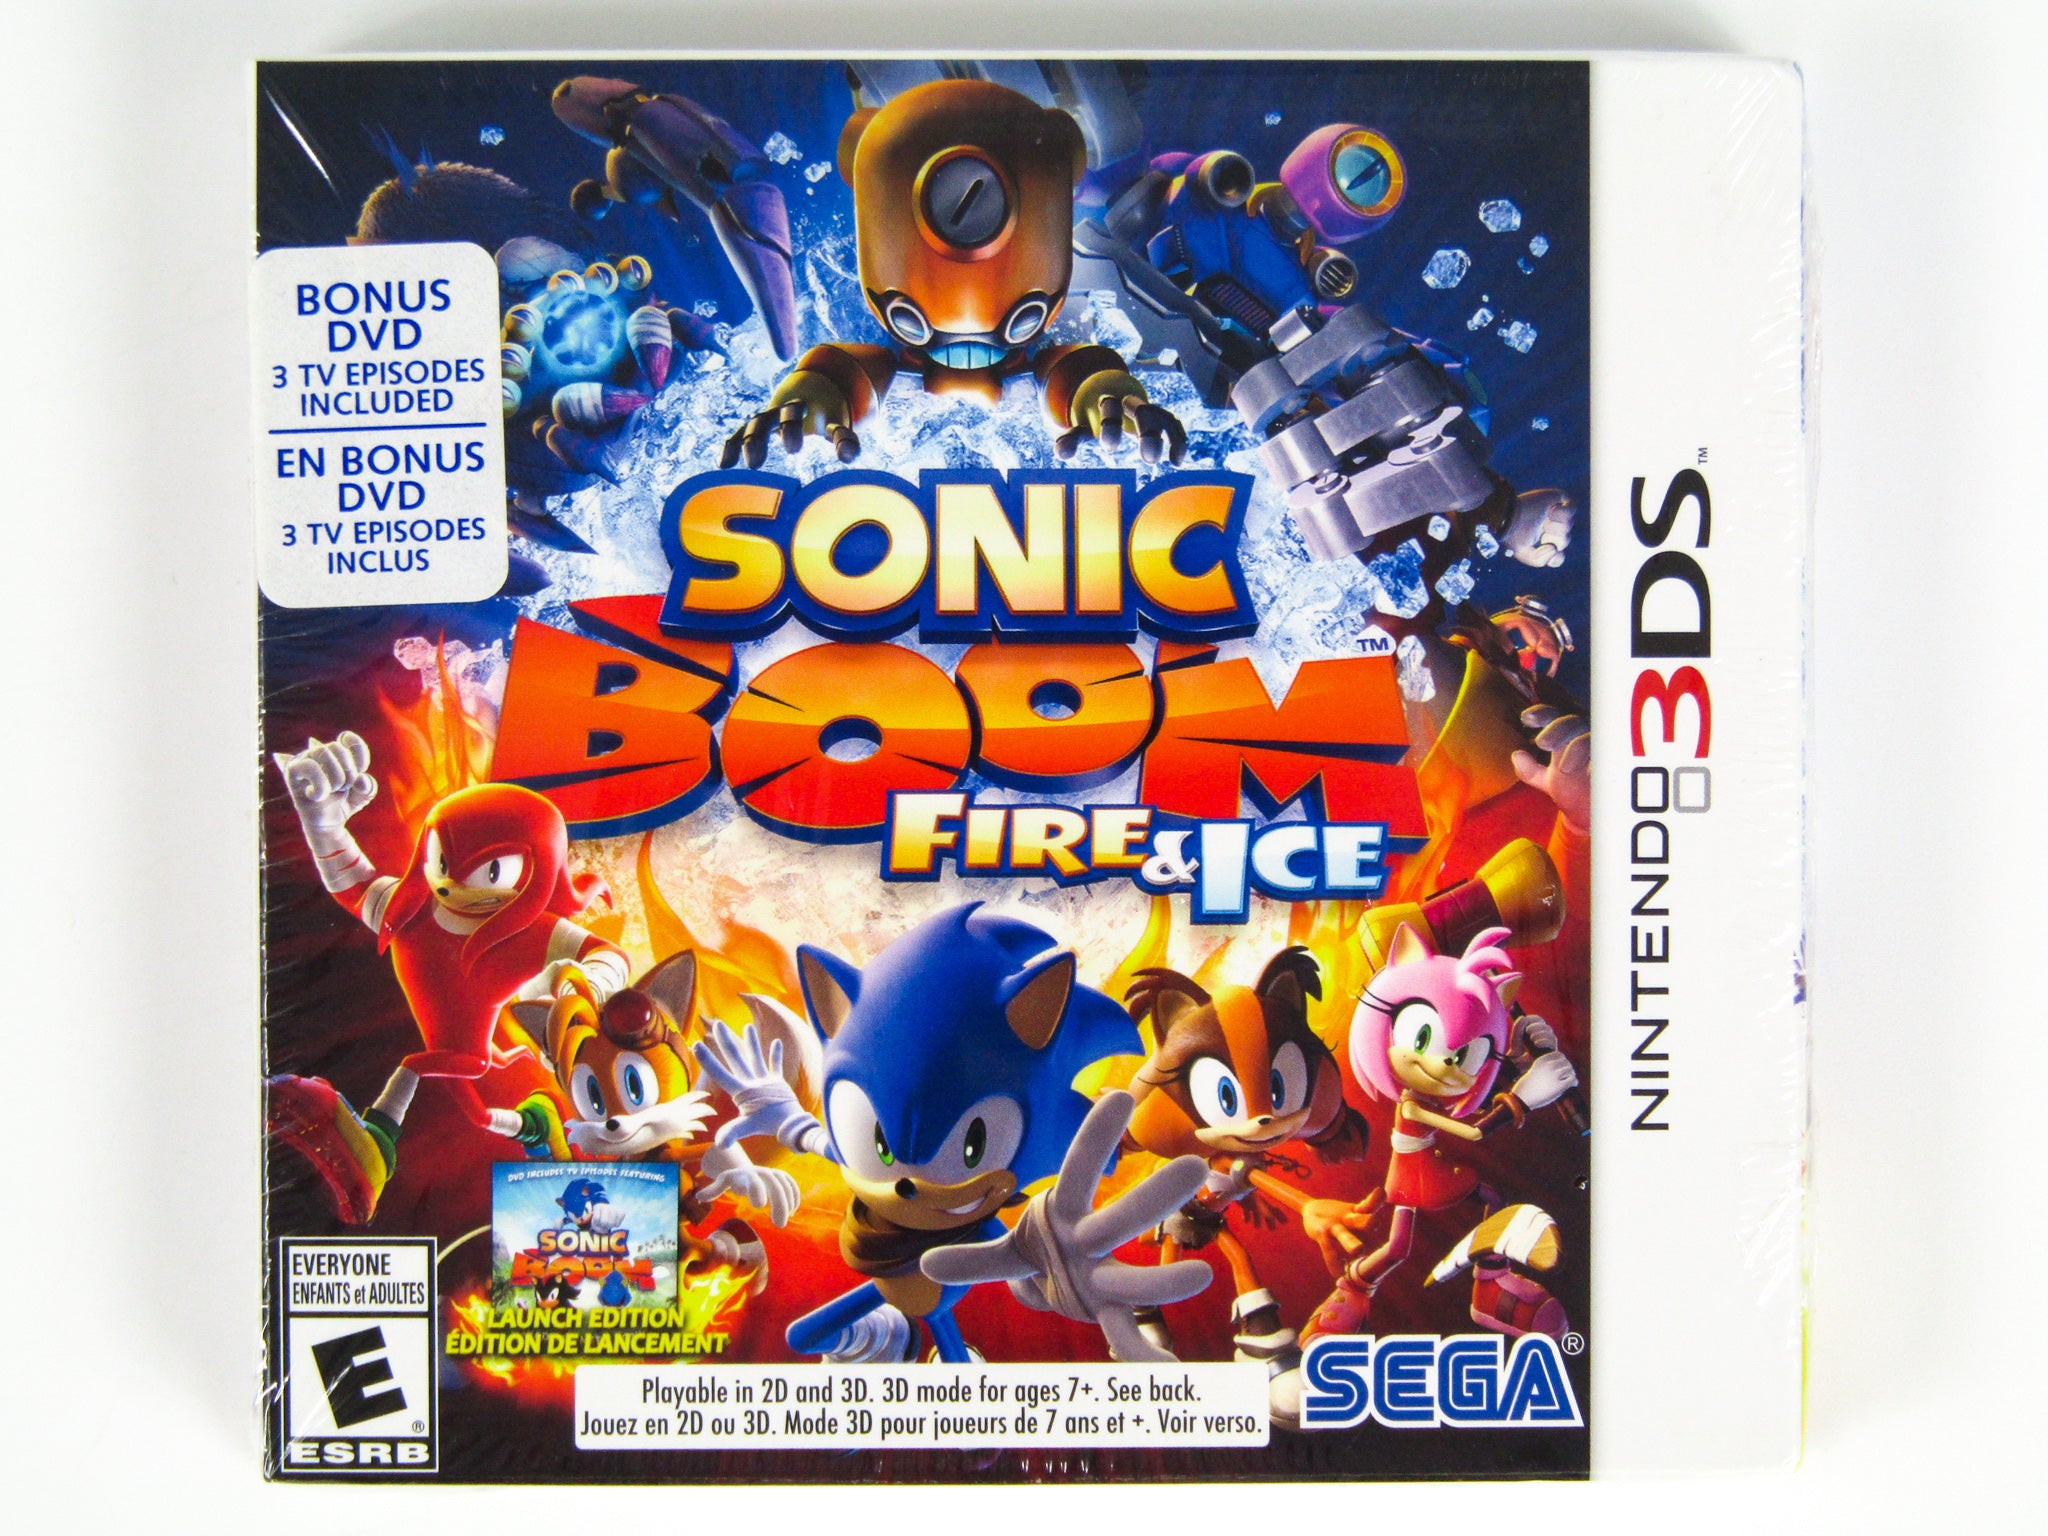 Nintendo Wii, PS3 Lot & Sonic Boom: Fire And Ice For 3DS w/ Bonus DVD, Games